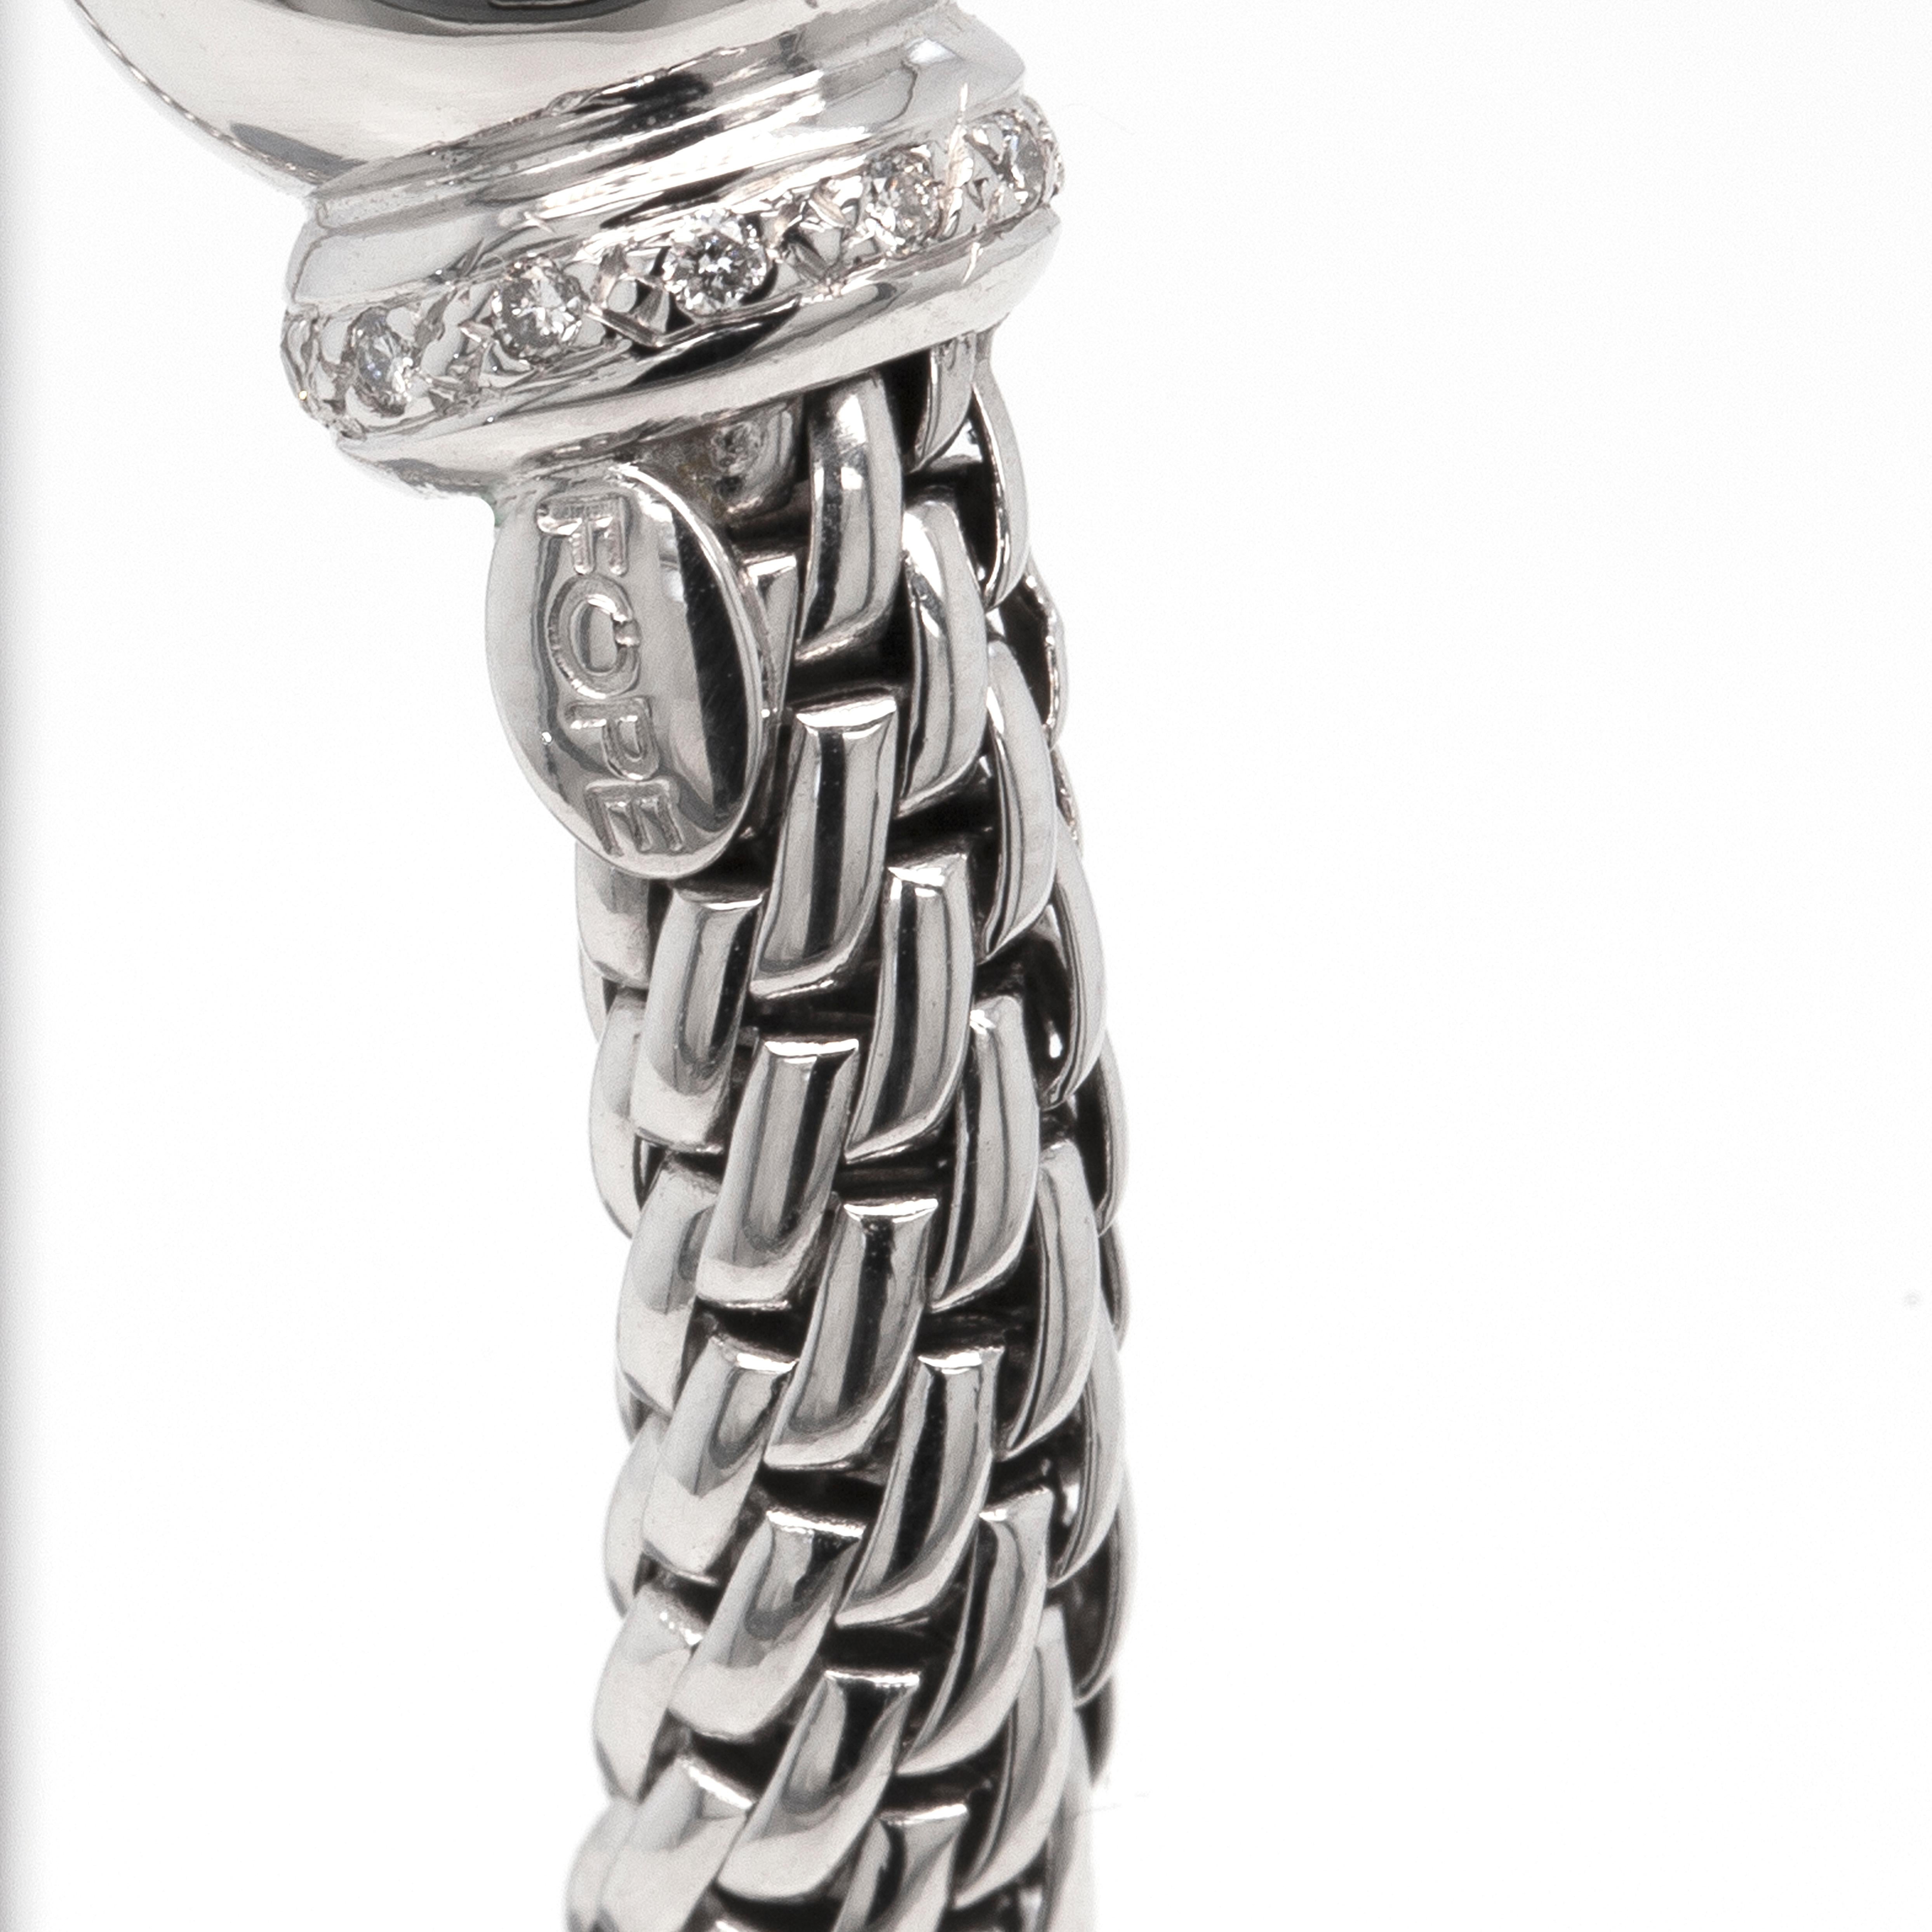 This cuff bracelet from the Italian luxury house, FOPE features their signature Novecento mesh design masterfully crafted from 18 carat white gold.
The piece is complemented by smooth rounded end caps embellished with approximately 0.28ct of fine